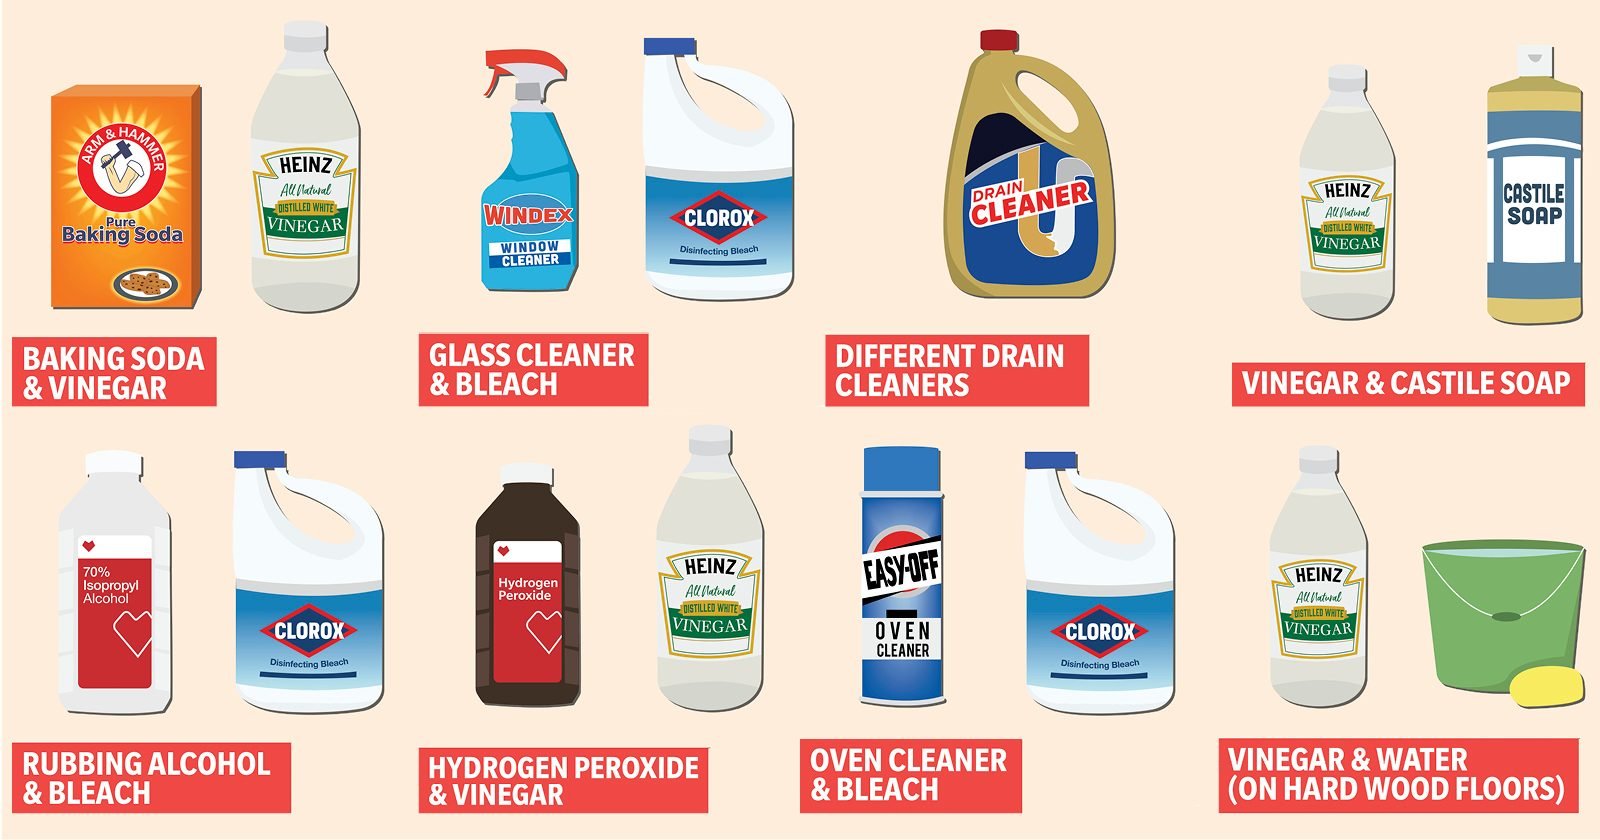 https://www.tasteofhome.com/wp-content/uploads/2018/12/20-Common-Household-Cleaning-Products-You-Should-Never-Mix.jpg